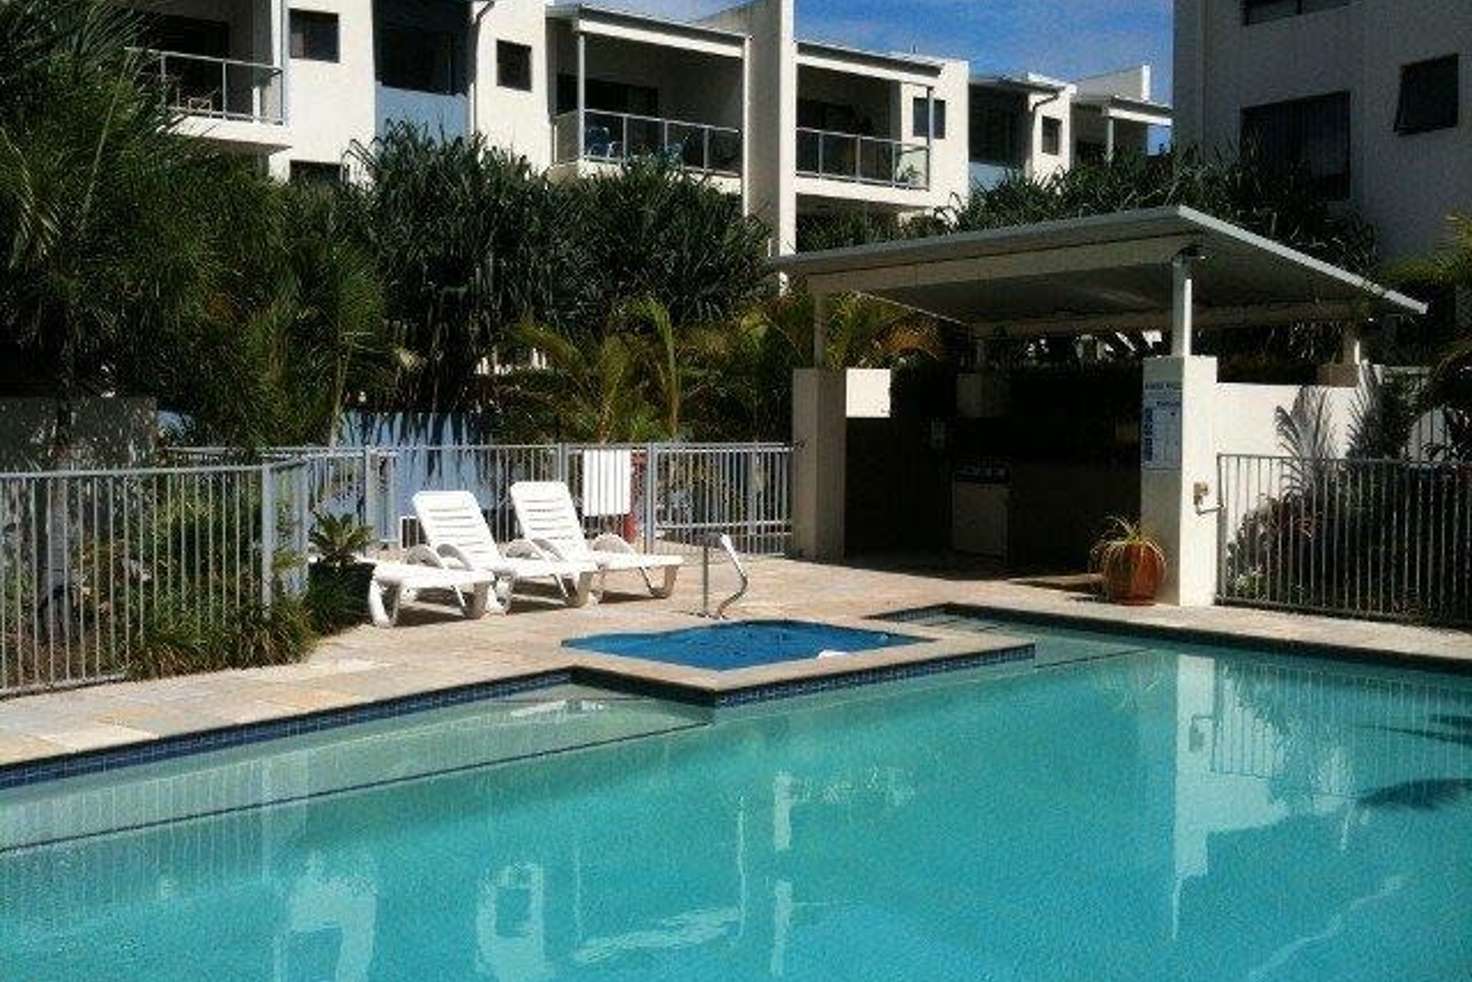 Main view of Homely apartment listing, 8/6 Fifth Avenue, Burleigh Heads QLD 4220